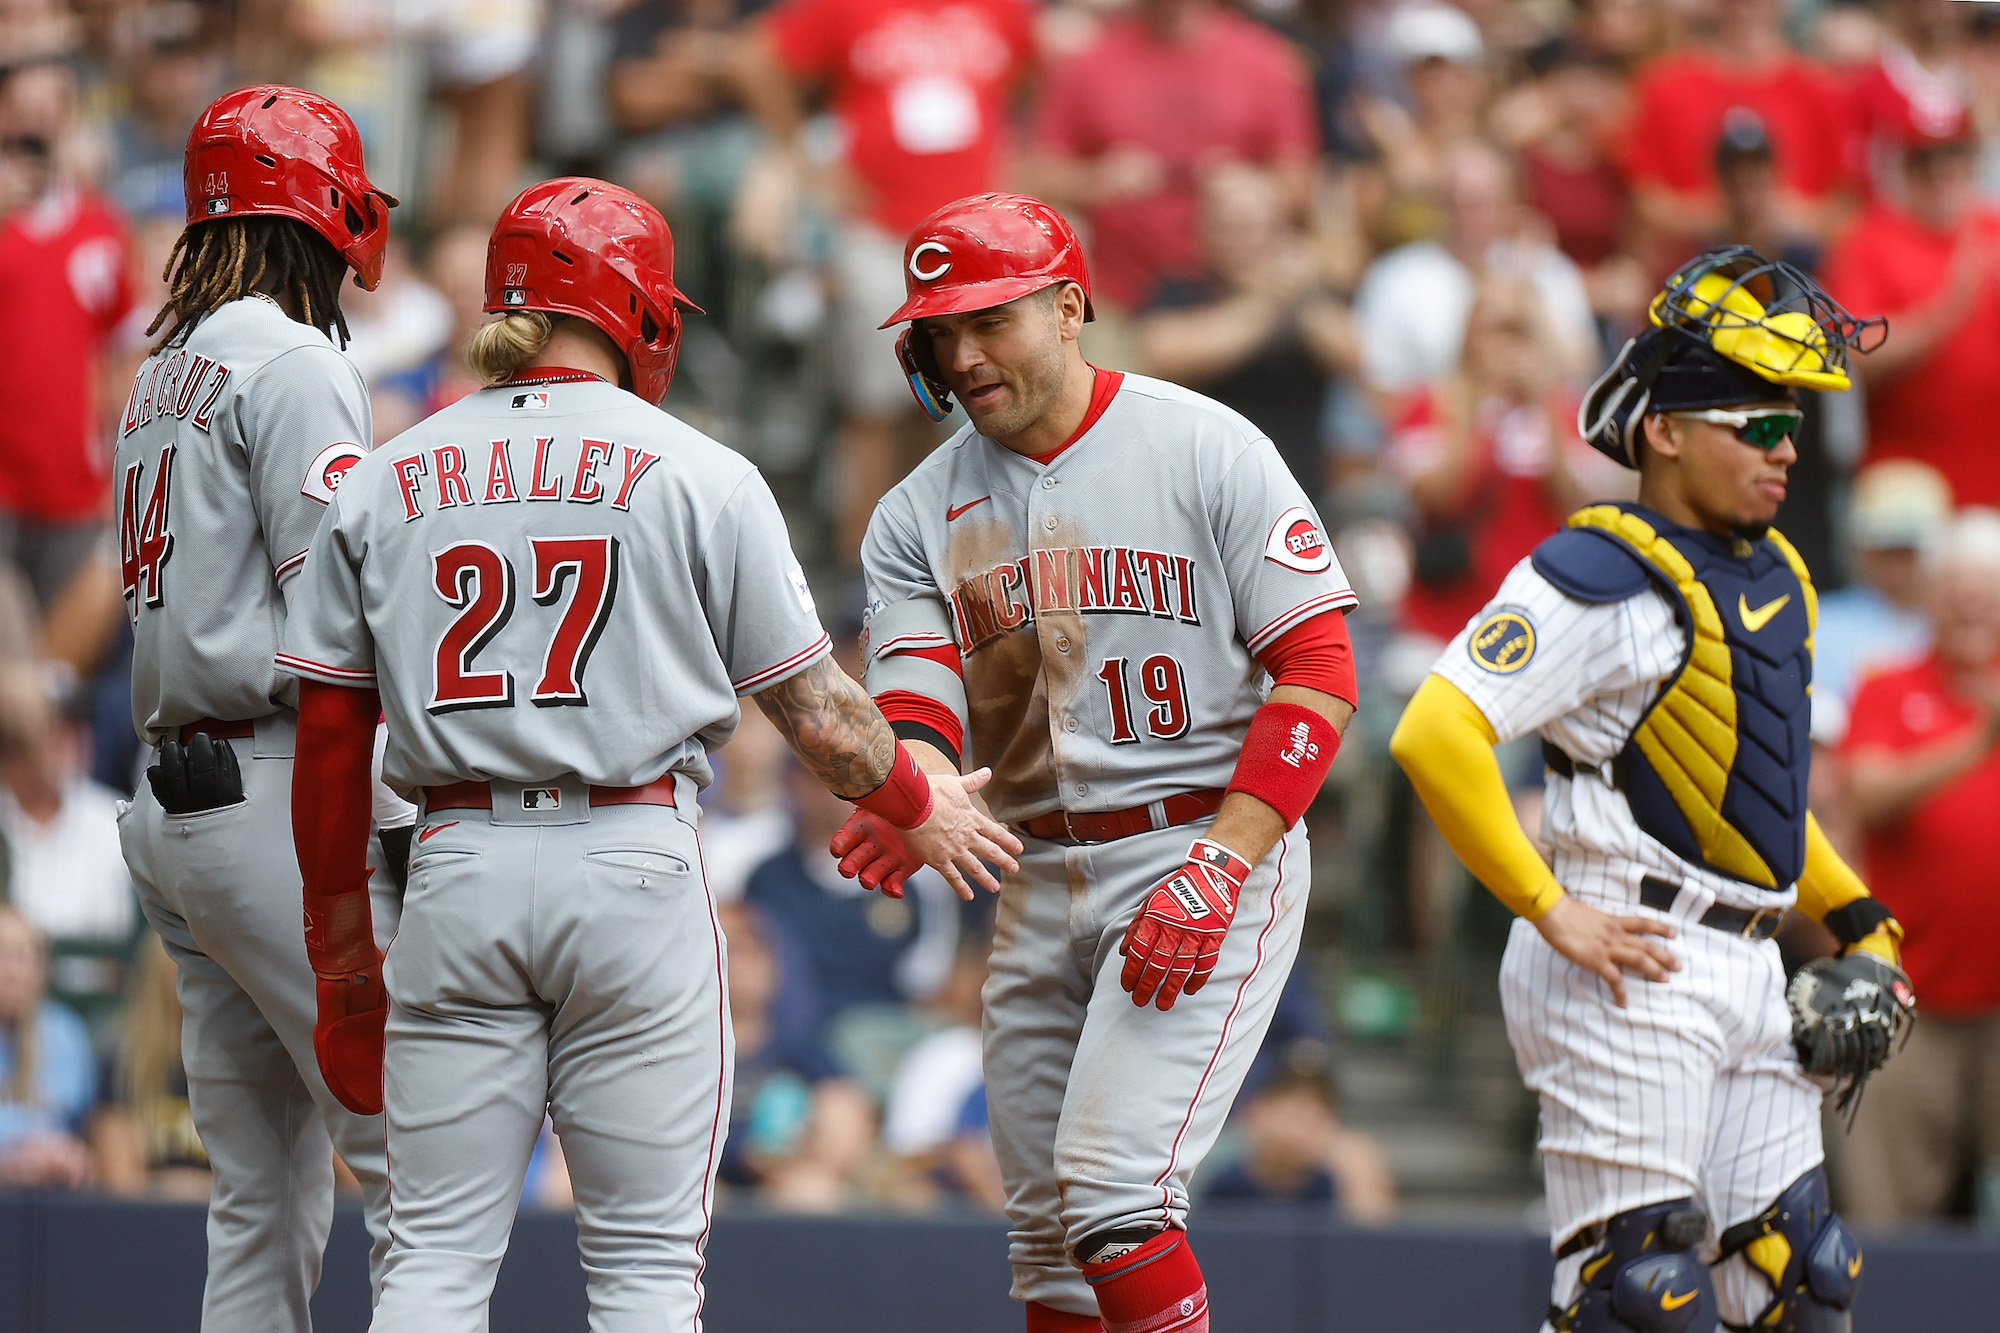 MILWAUKEE, WISCONSIN - JULY 08: Joey Votto #19 of the Cincinnati Reds is congratulated by Elly De La Cruz #44 and Jake Fraley #27 after a three-run home run in the fourth inning against the Milwaukee Brewers at American Family Field on July 08, 2023 in Milwaukee, Wisconsin. (Photo by John Fisher/Getty Images)